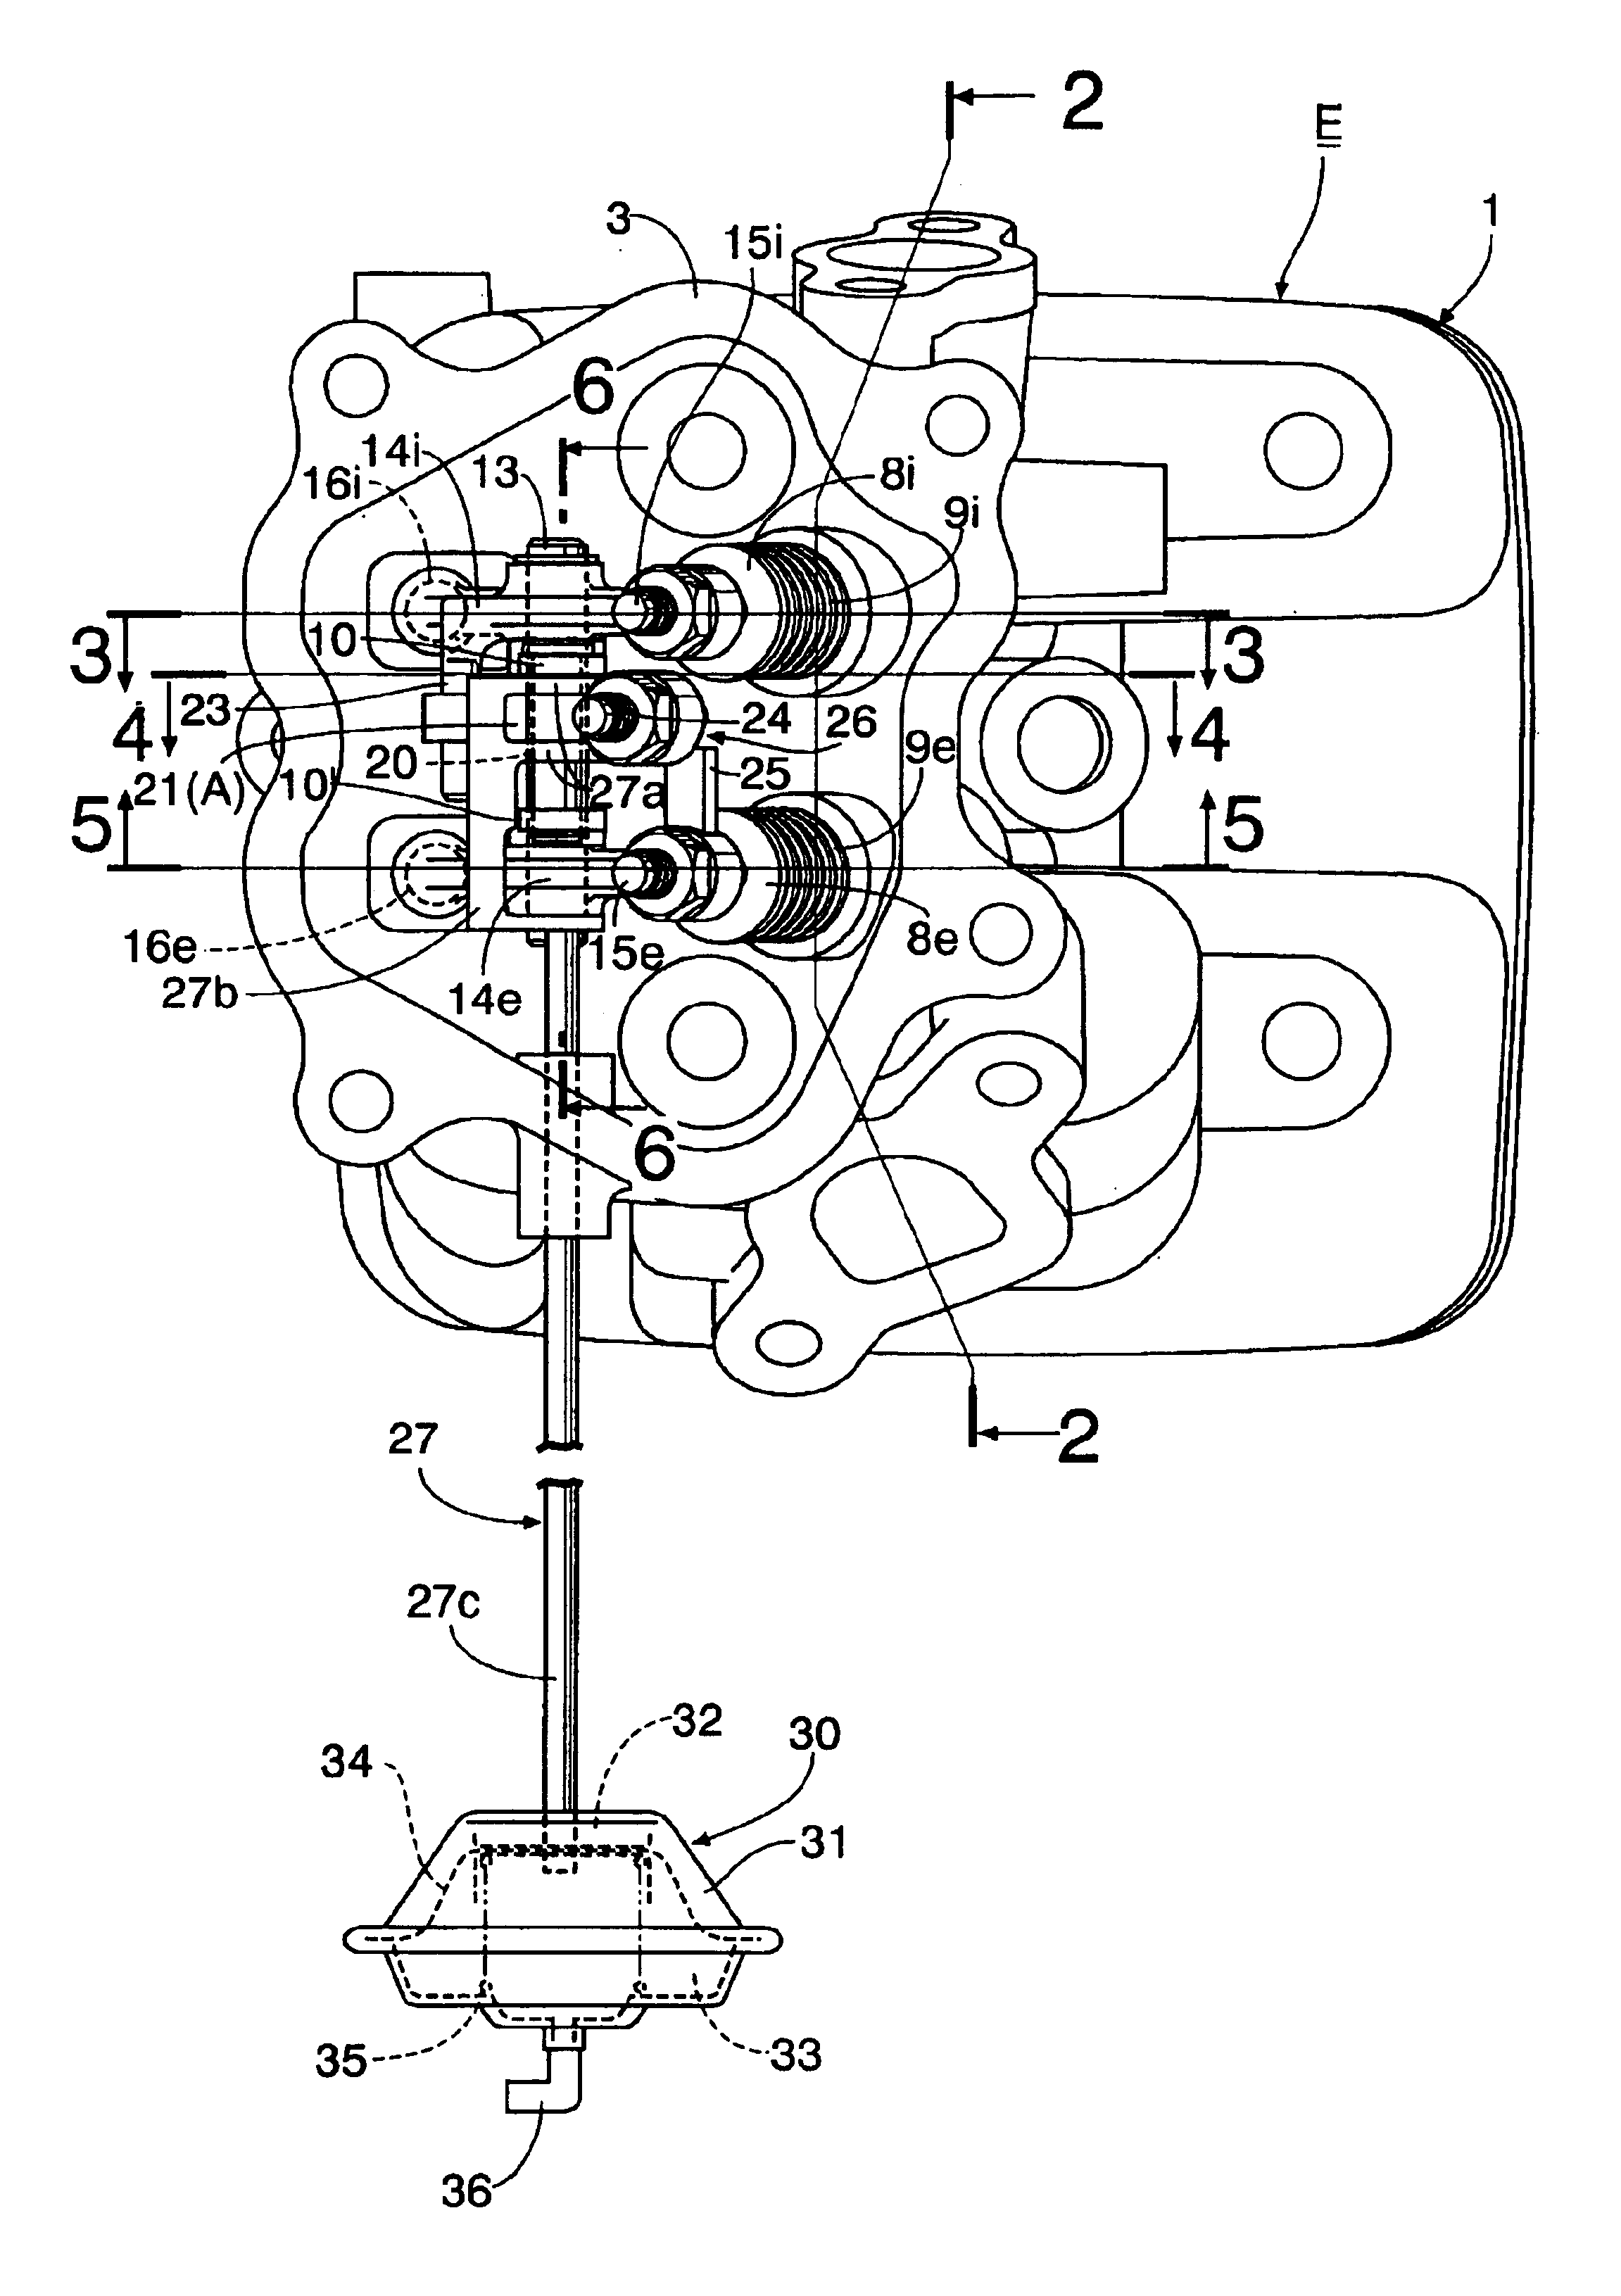 Exhaust gas reflux apparatus for internal combustion engine